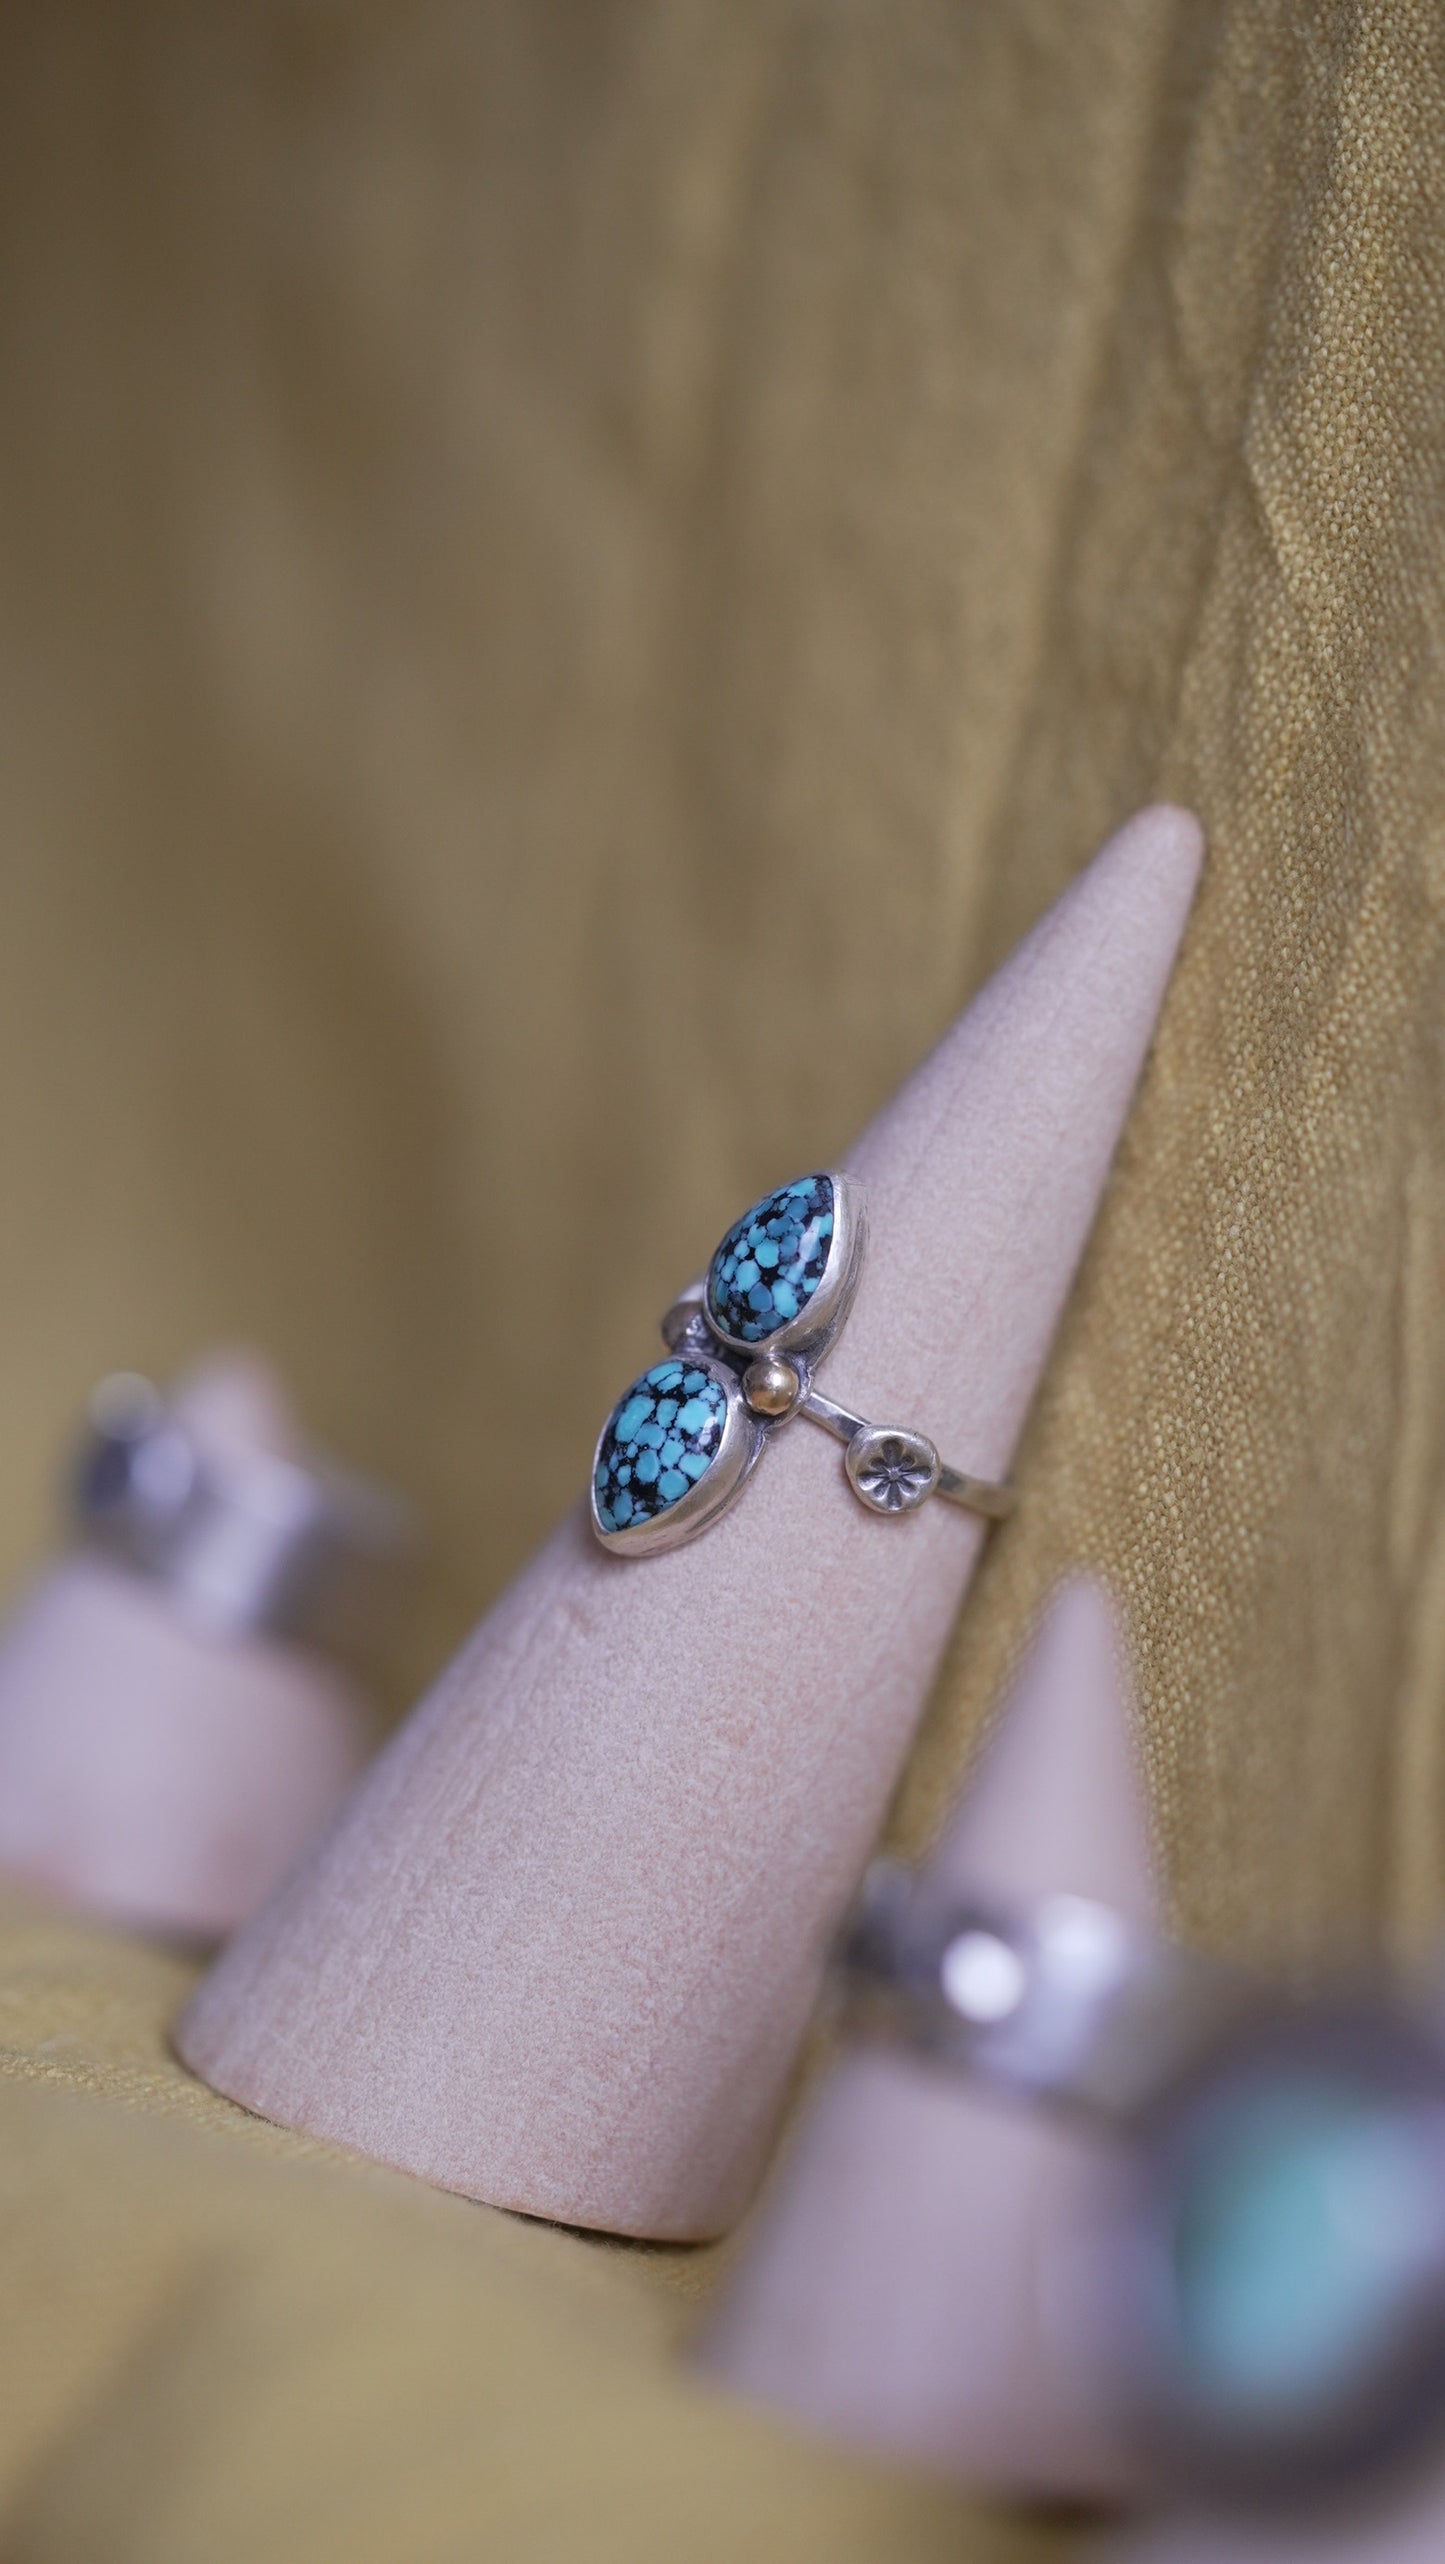 Spiderweb Turquoise Ring // Fancy with a side of gritty (size 6)